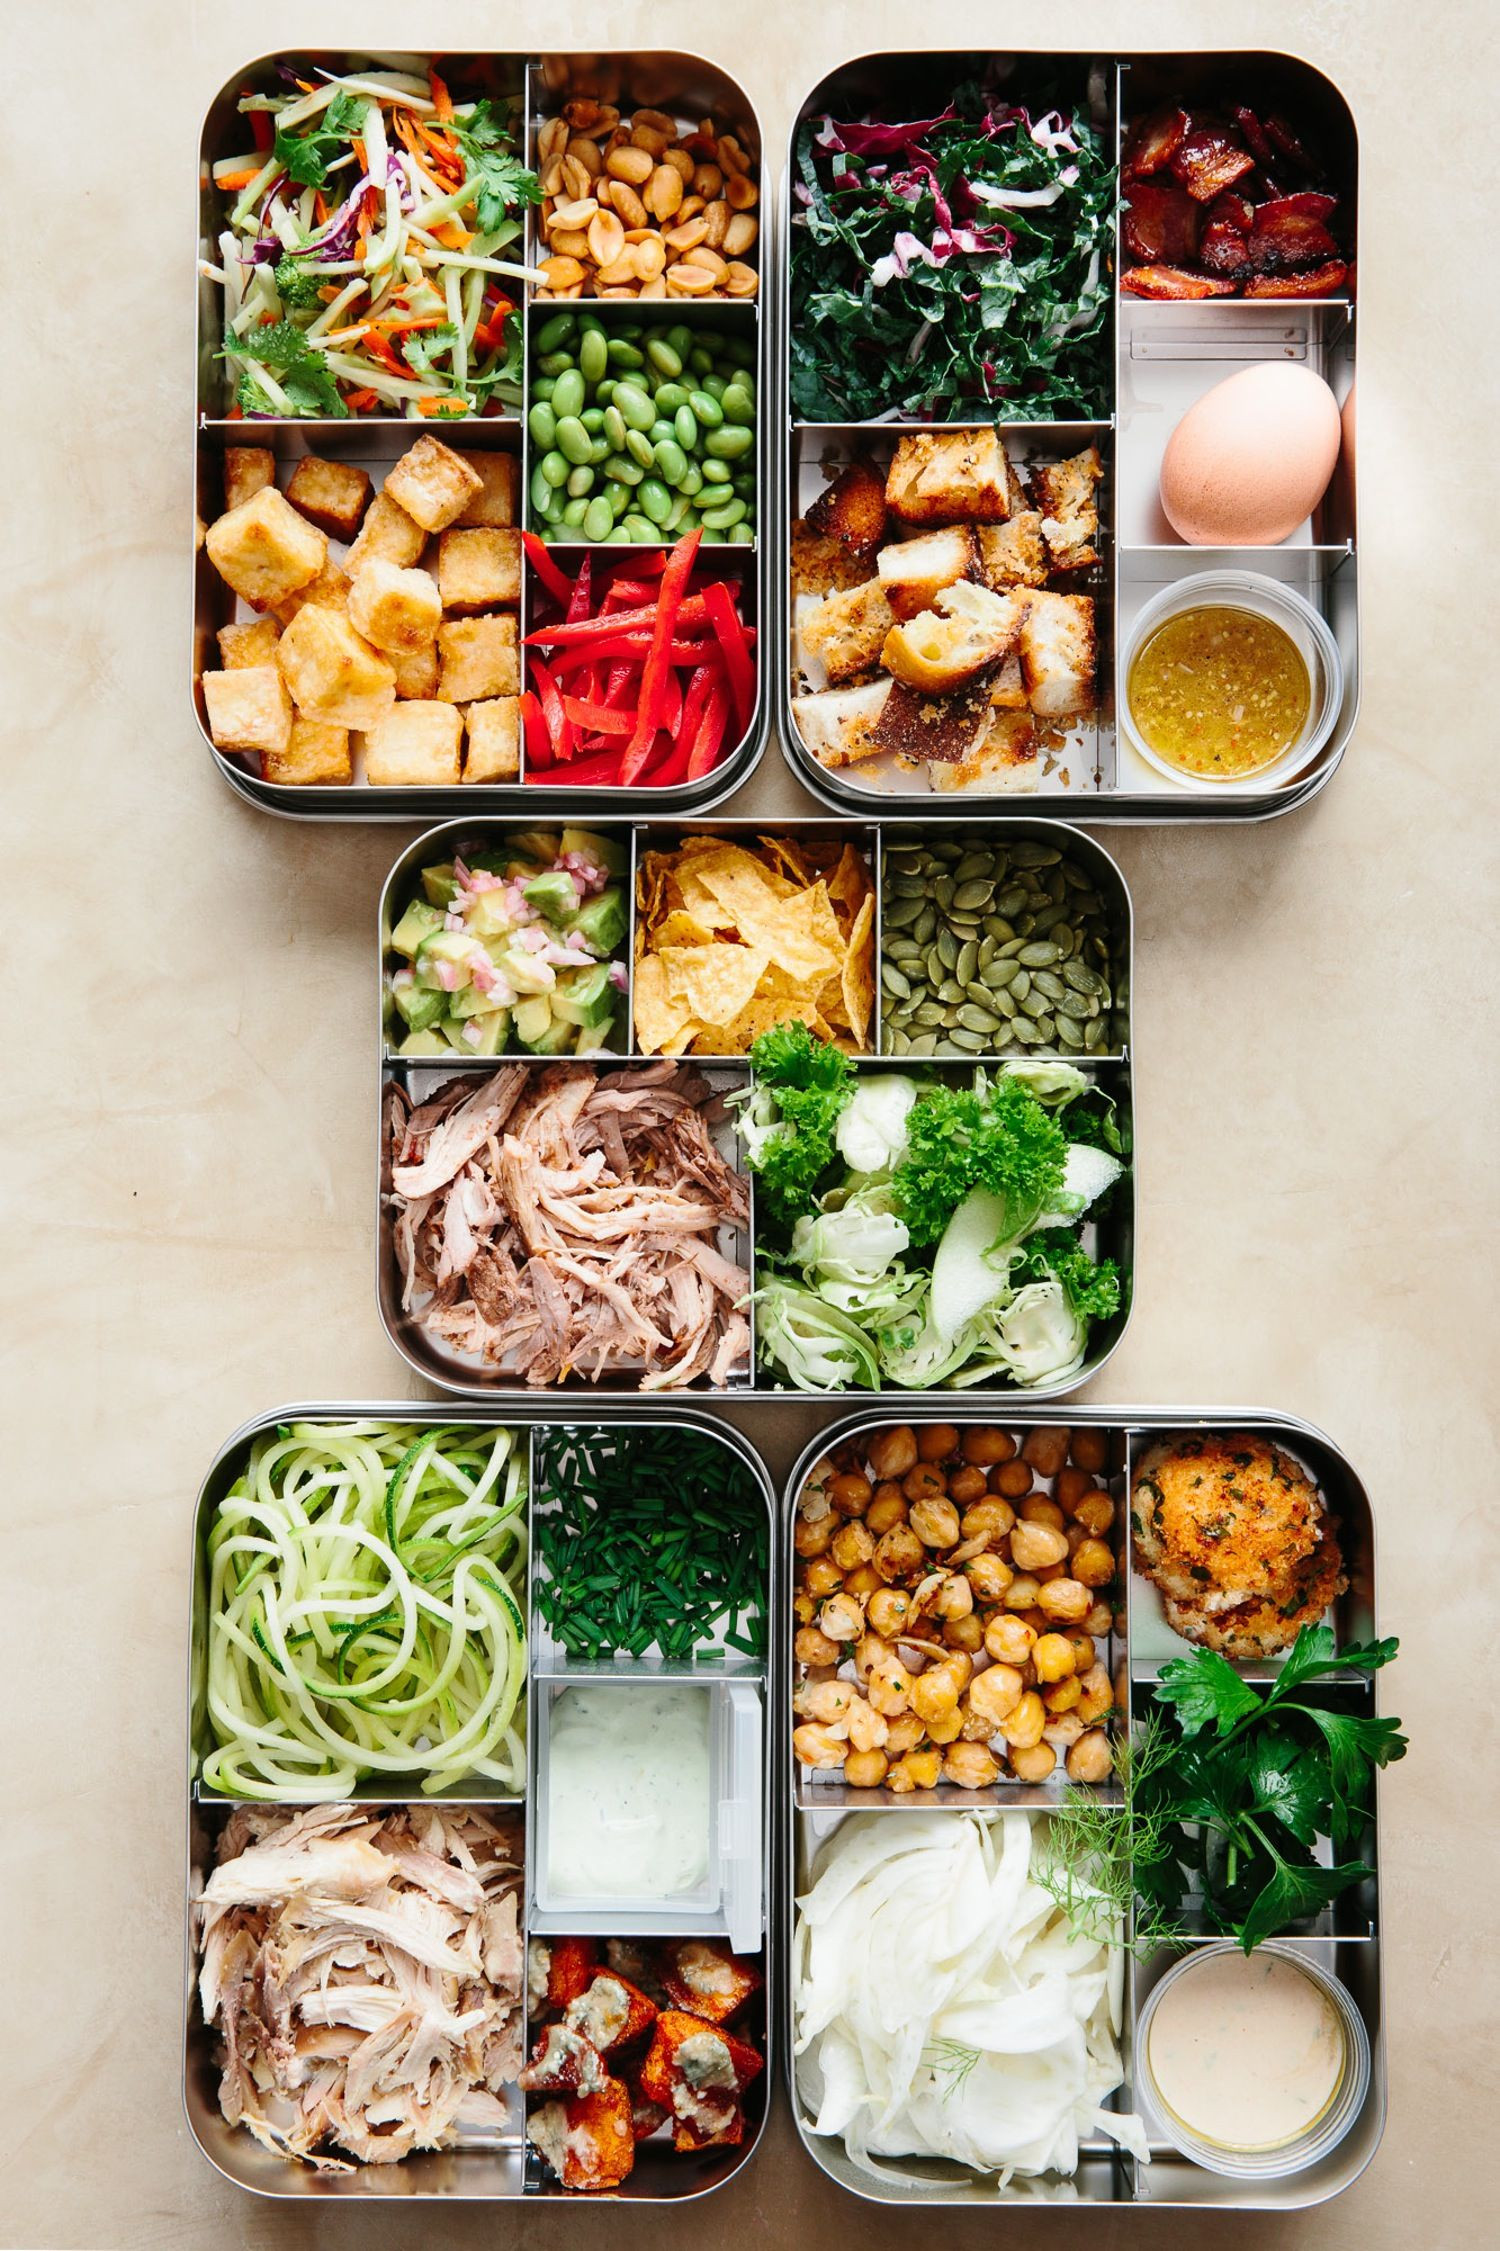 Healthy Make Ahead Lunches For Week
 Sunday Night Salads 5 Recipes to Make Ahead and Eat All